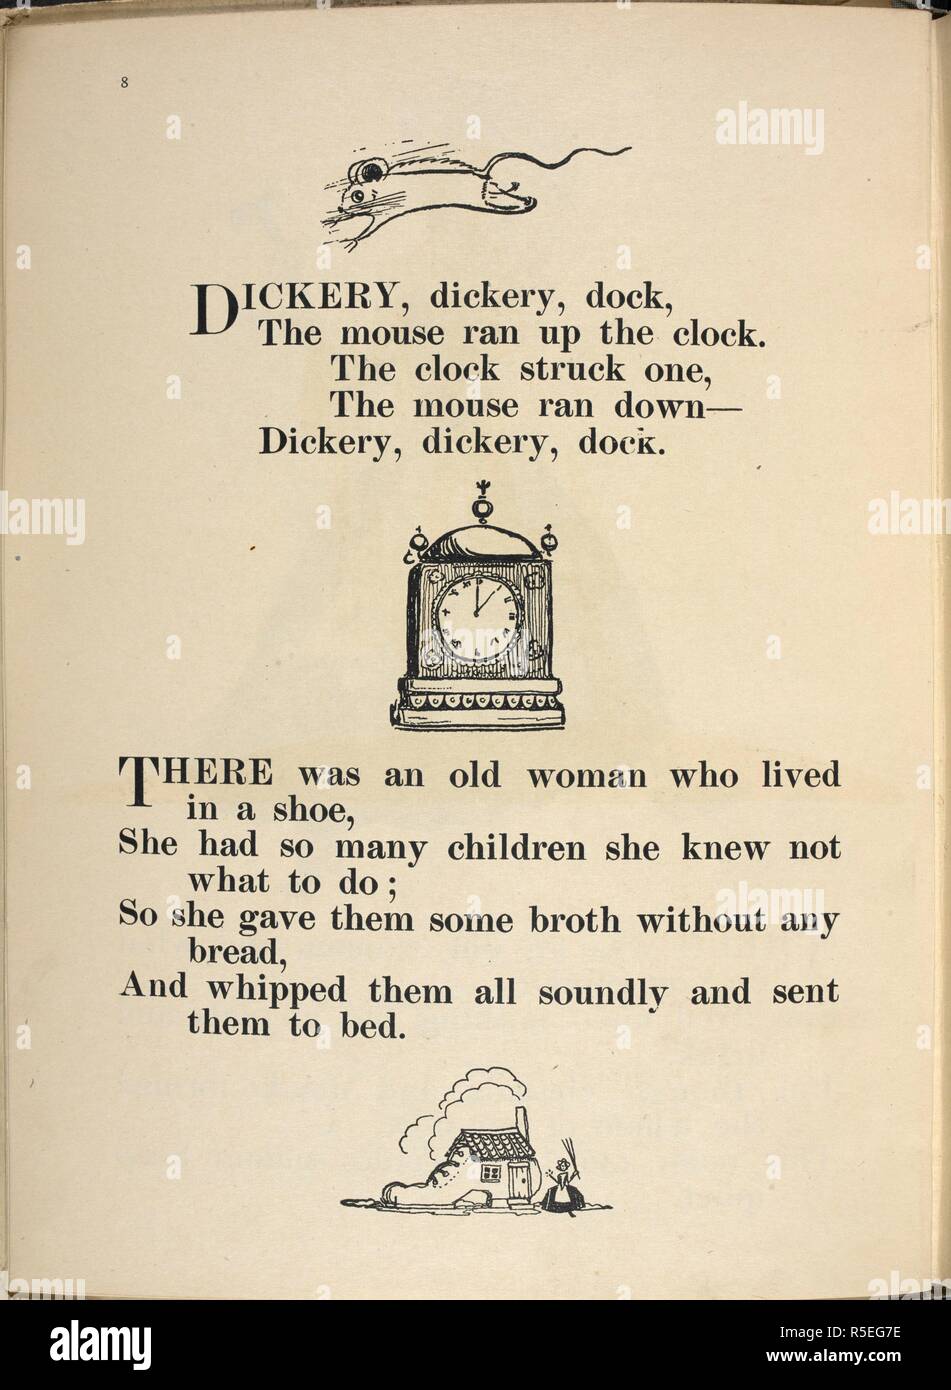 https://c8.alamy.com/comp/R5EG7E/dickery-dickery-dock-the-mouse-ran-up-the-clock-nursery-rhymes-with-pictures-by-c-l-fraser-london-t-c-e-c-jack-1919-source-12800ddd31-page-8-author-fraser-claud-lovat-R5EG7E.jpg